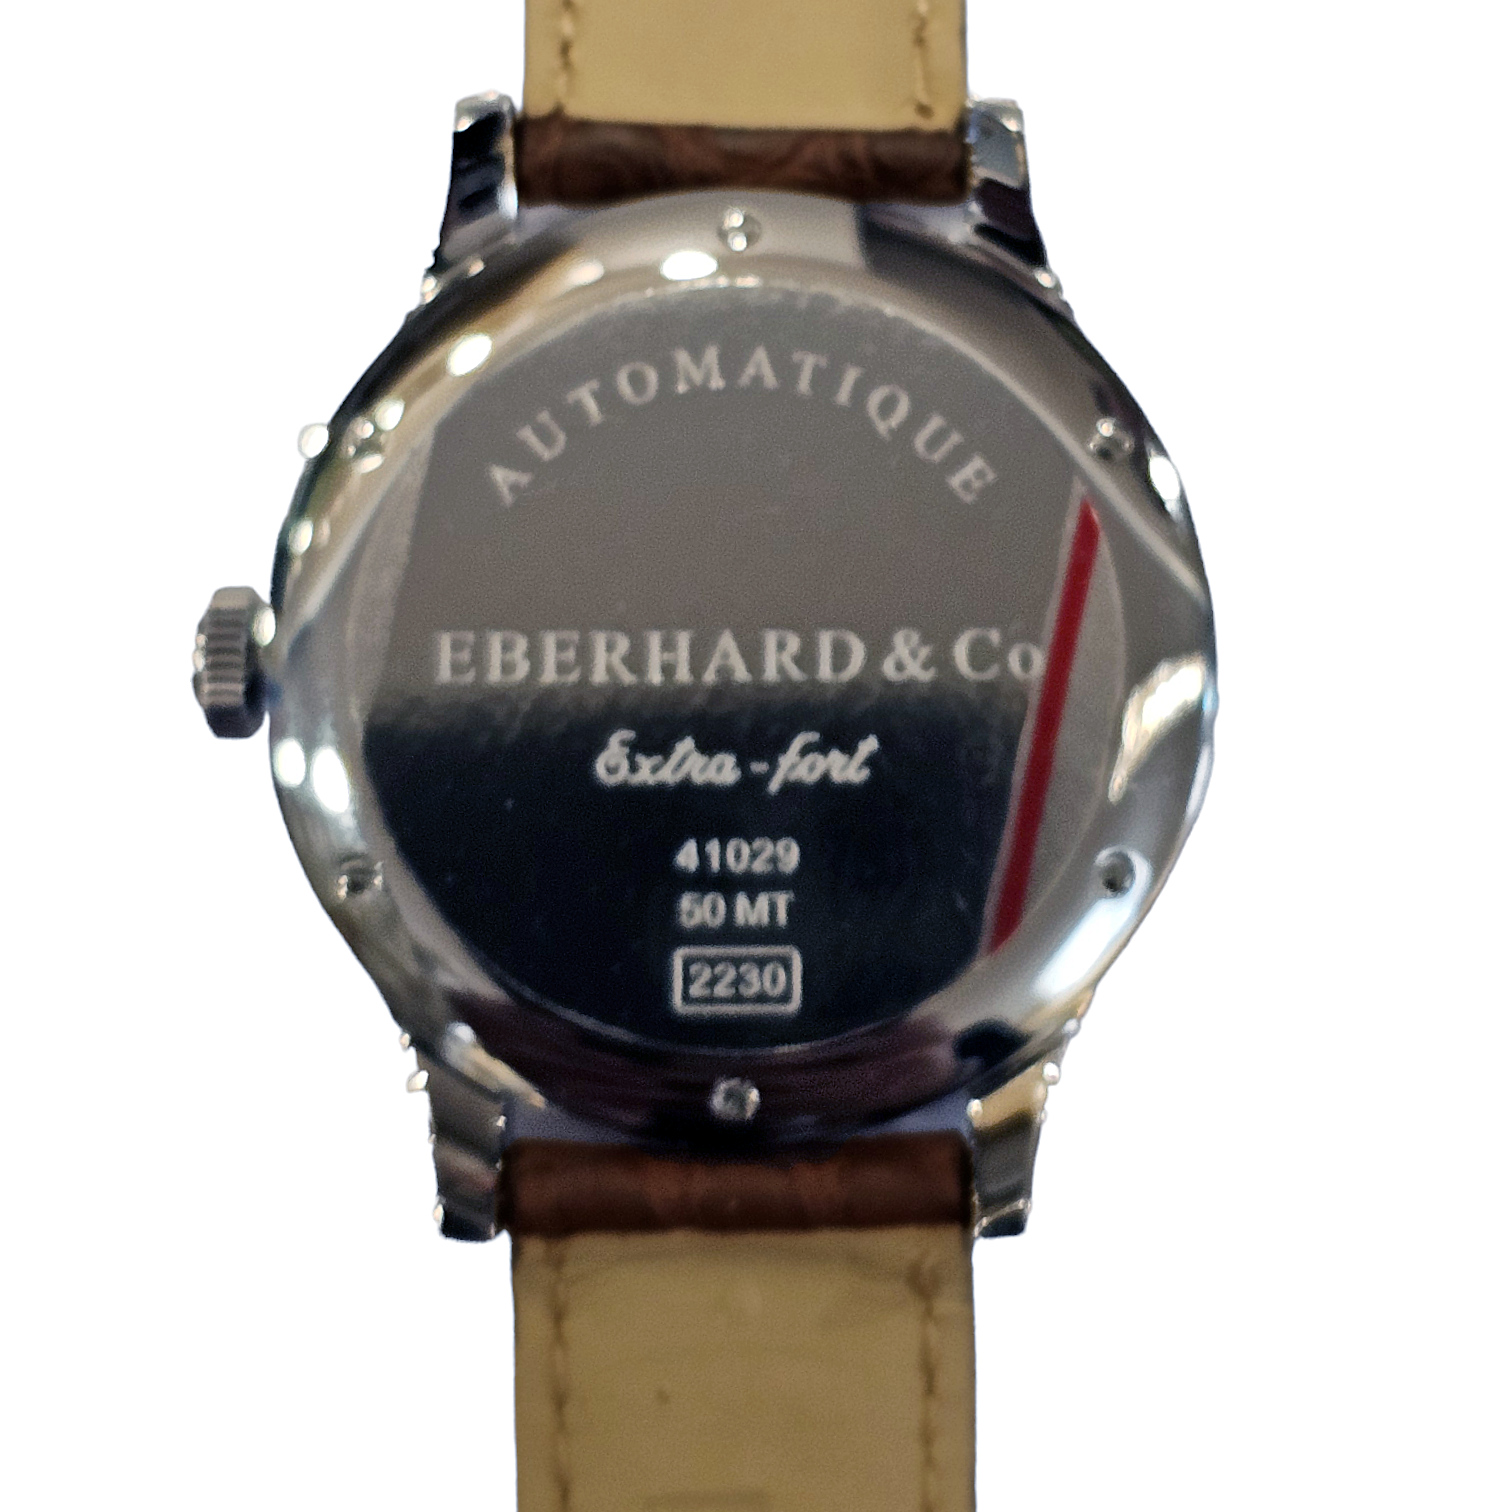 Eberhard &amp; Co. Extra-Fort Automático Ref. 41029CP - ON6055